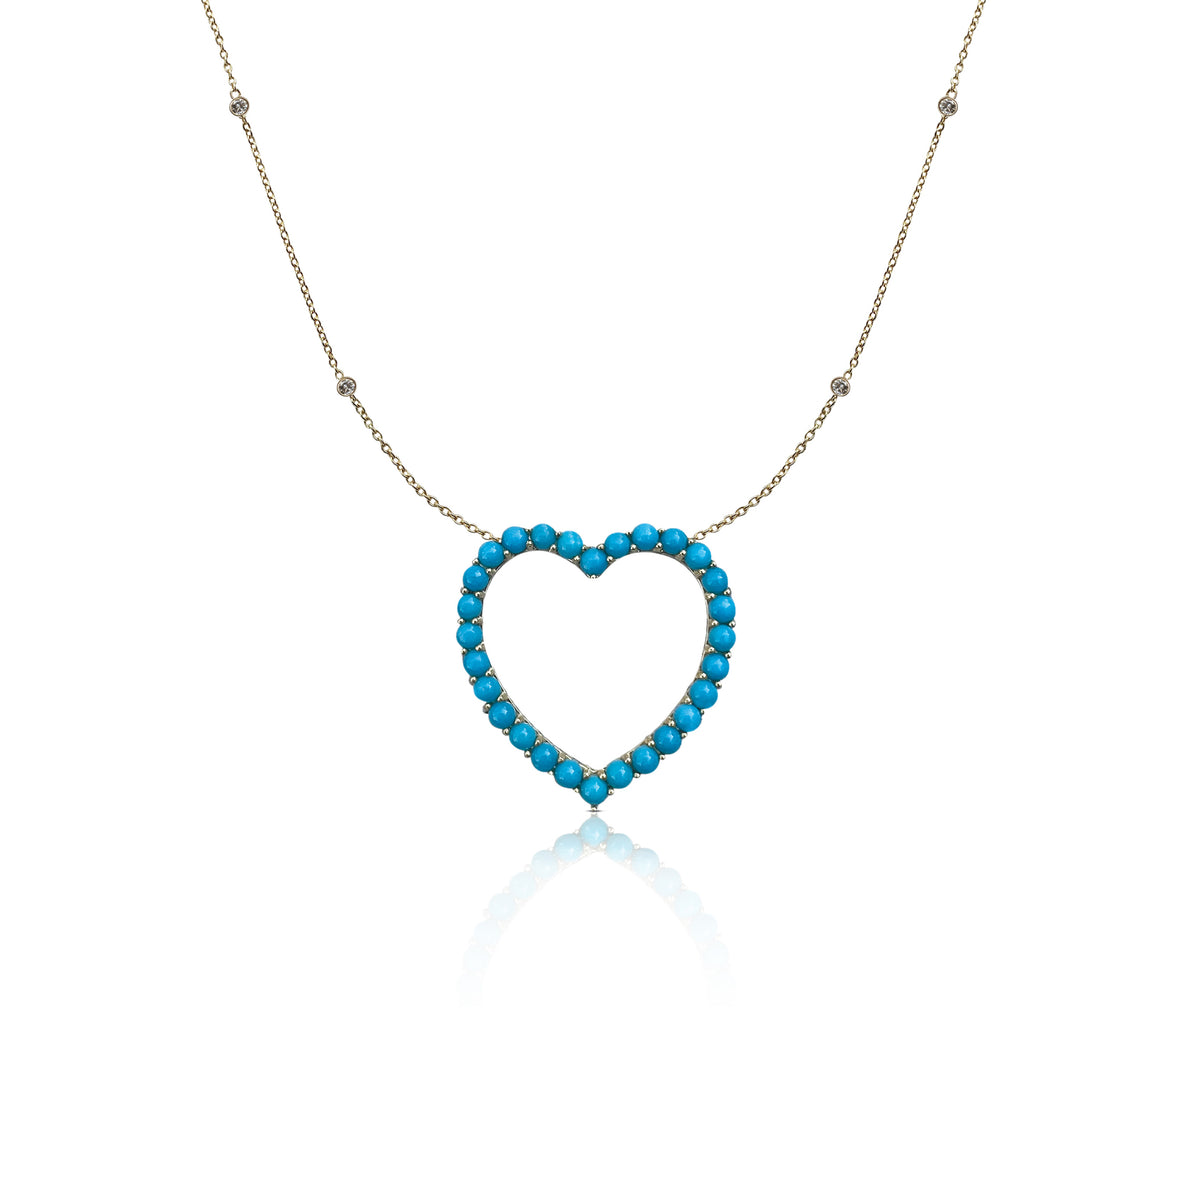 14k Diamond and Turquoise Open Heart Necklace